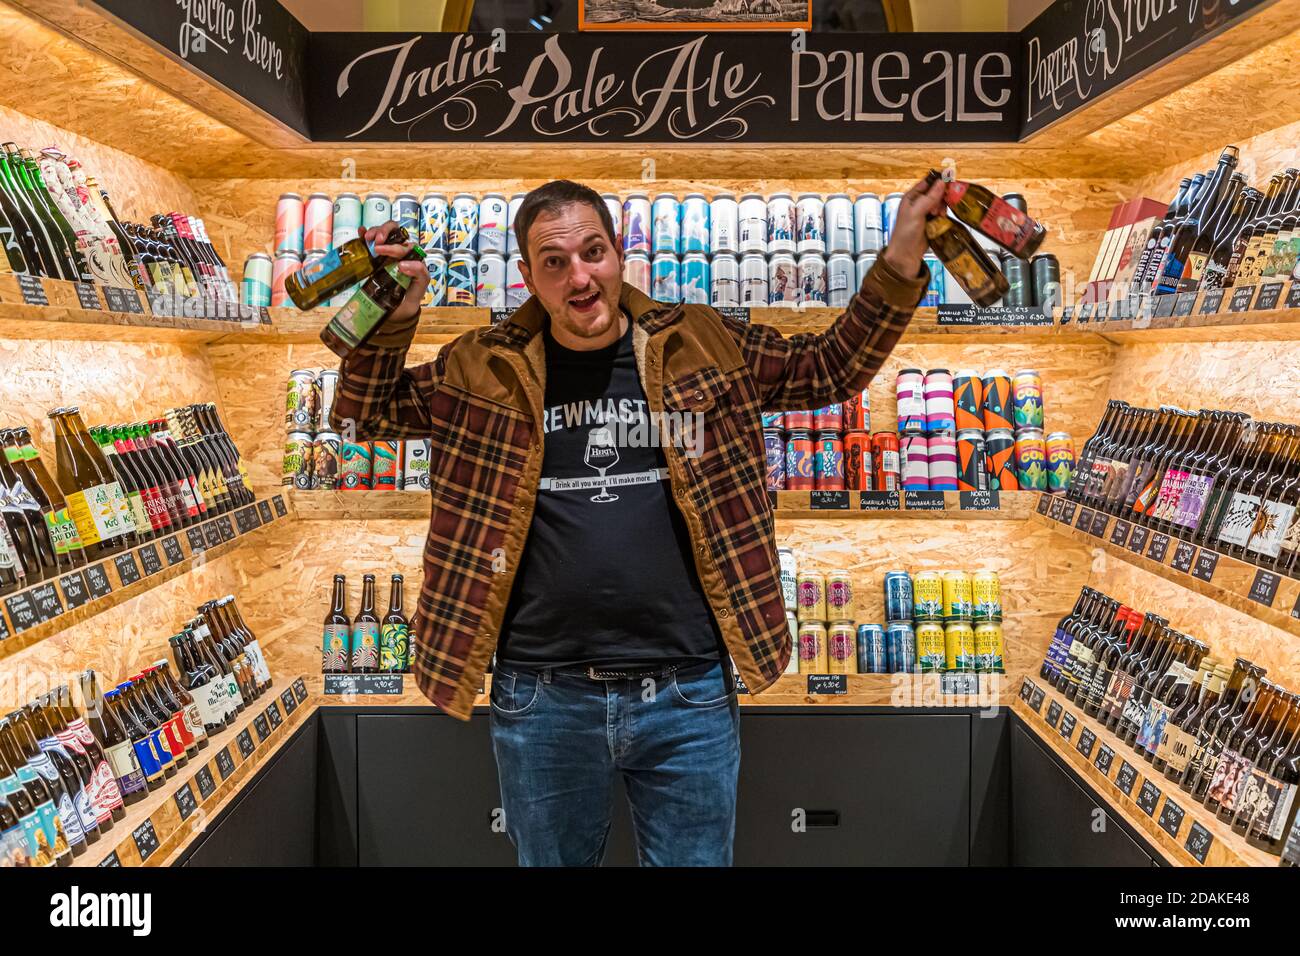 The Bierothek in Bamberg stocks beers from all over the world. As a master brewer and beer sommelier, owner David Hertl can tell you a lot about the beers, their ingredients and how they are made. Hertl Beer Boutique in Bamberg, Germany Stock Photo